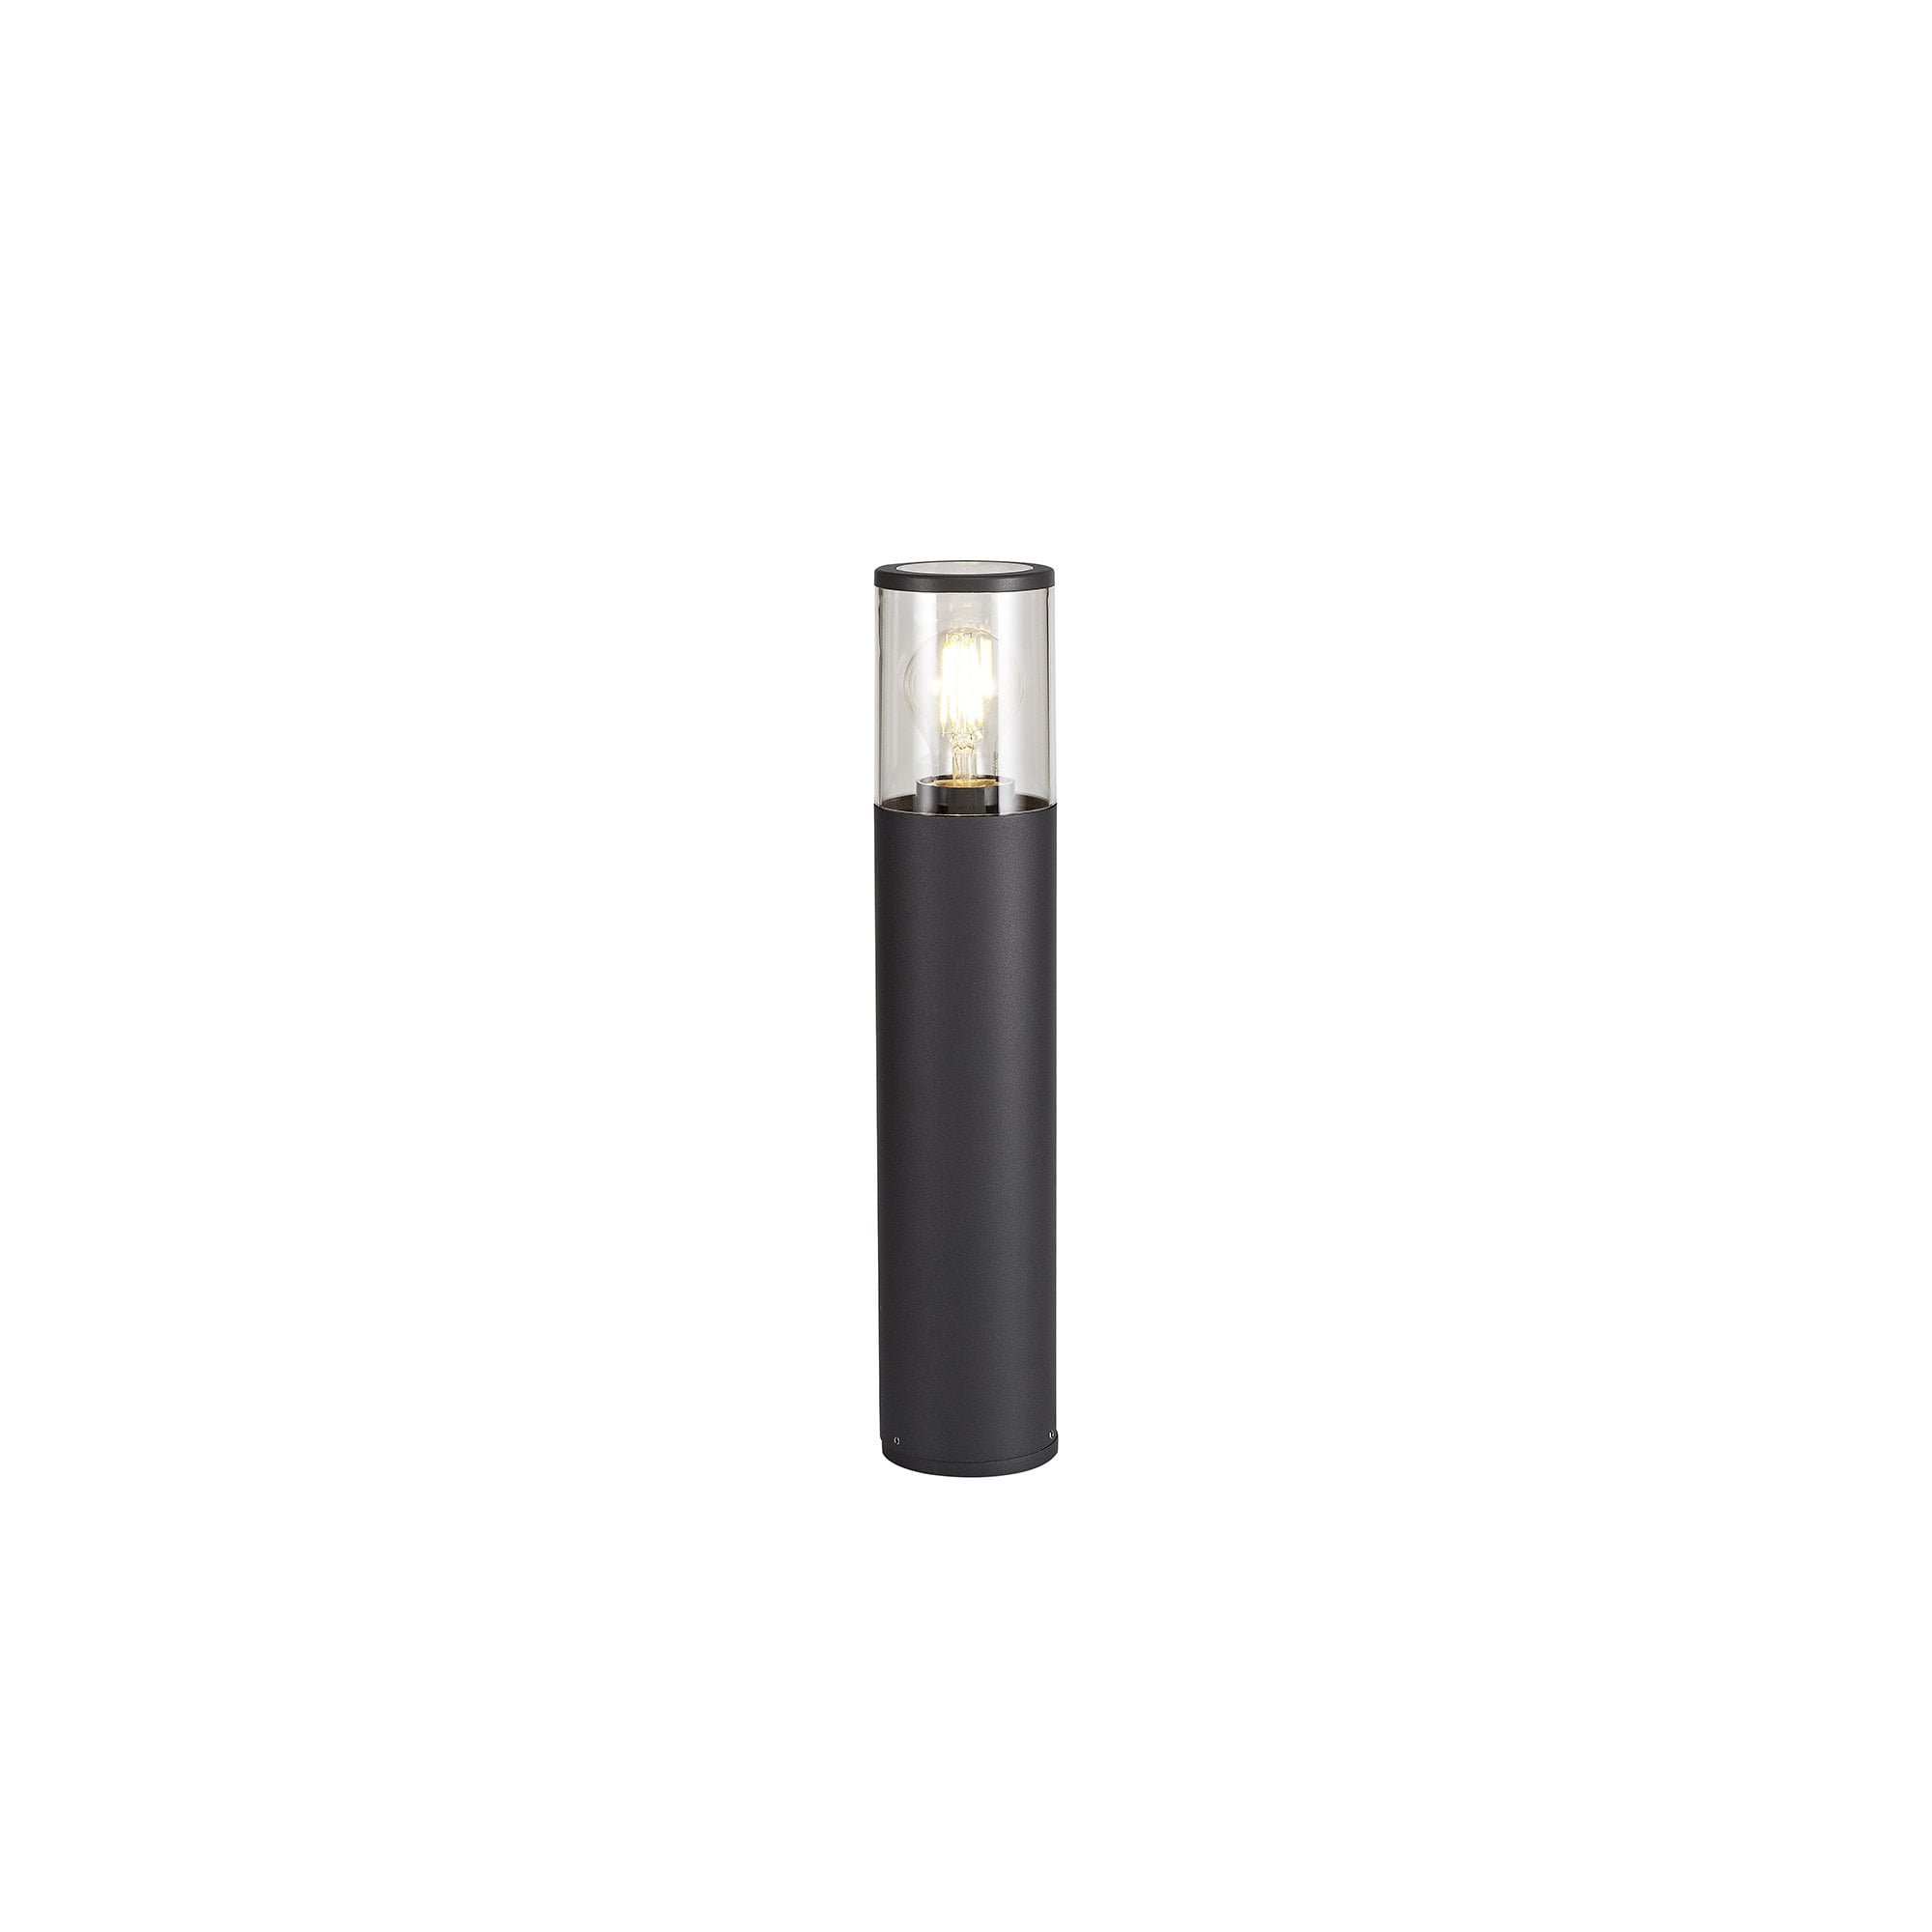 45cm Post Lamp 1 x E27, IP54, Anthracite/Smoked, 2yrs Warranty